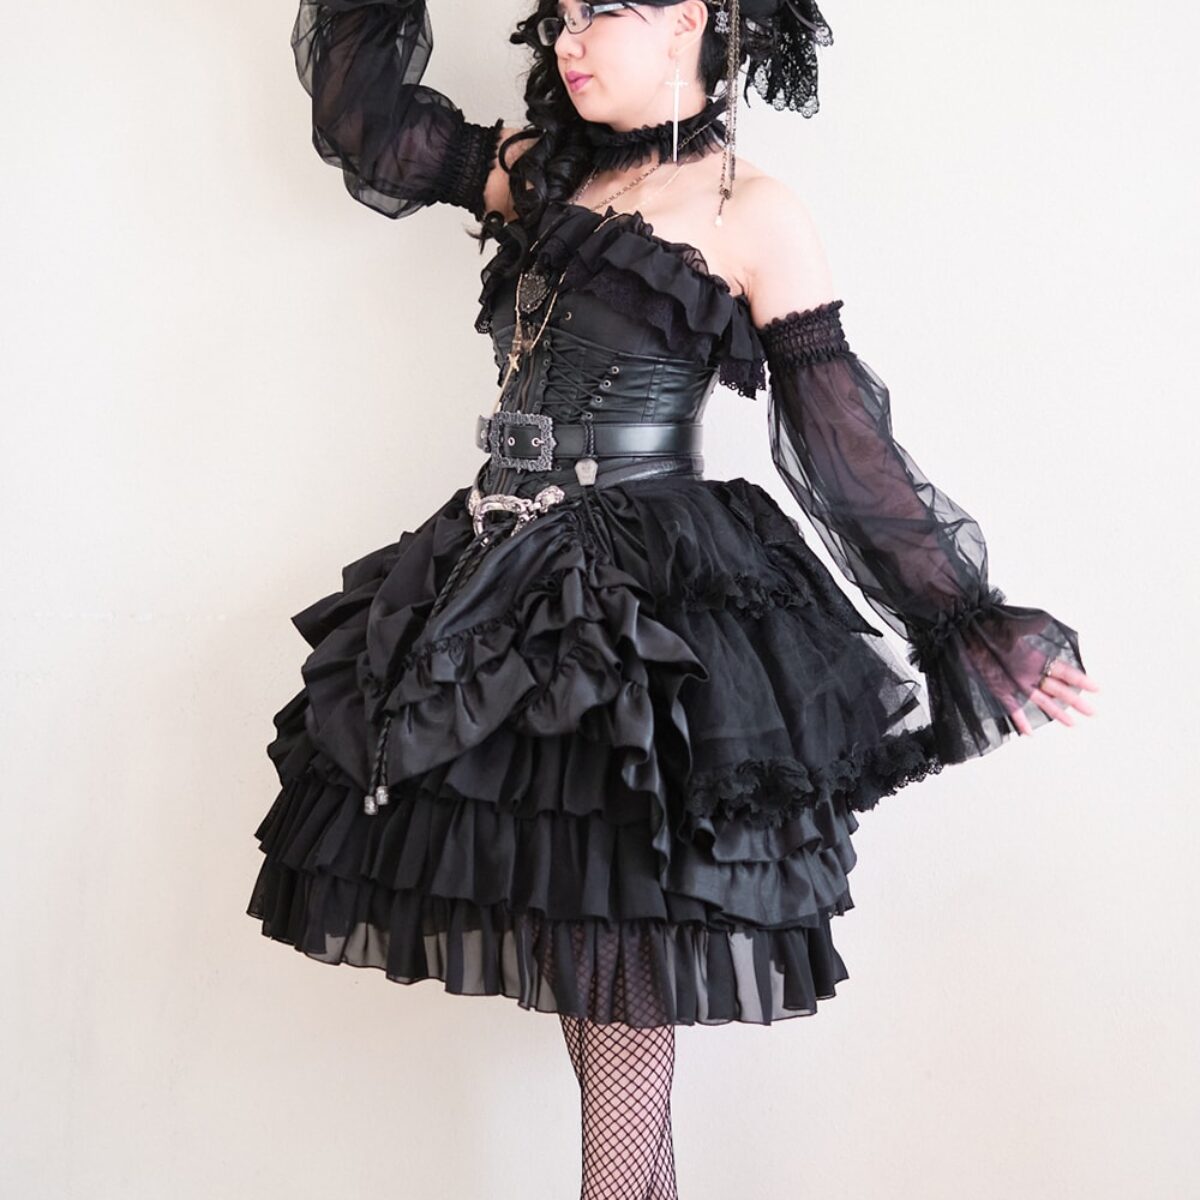 Gothic Pirate Lolita Outfit ft. Atelier Pierrot Dress